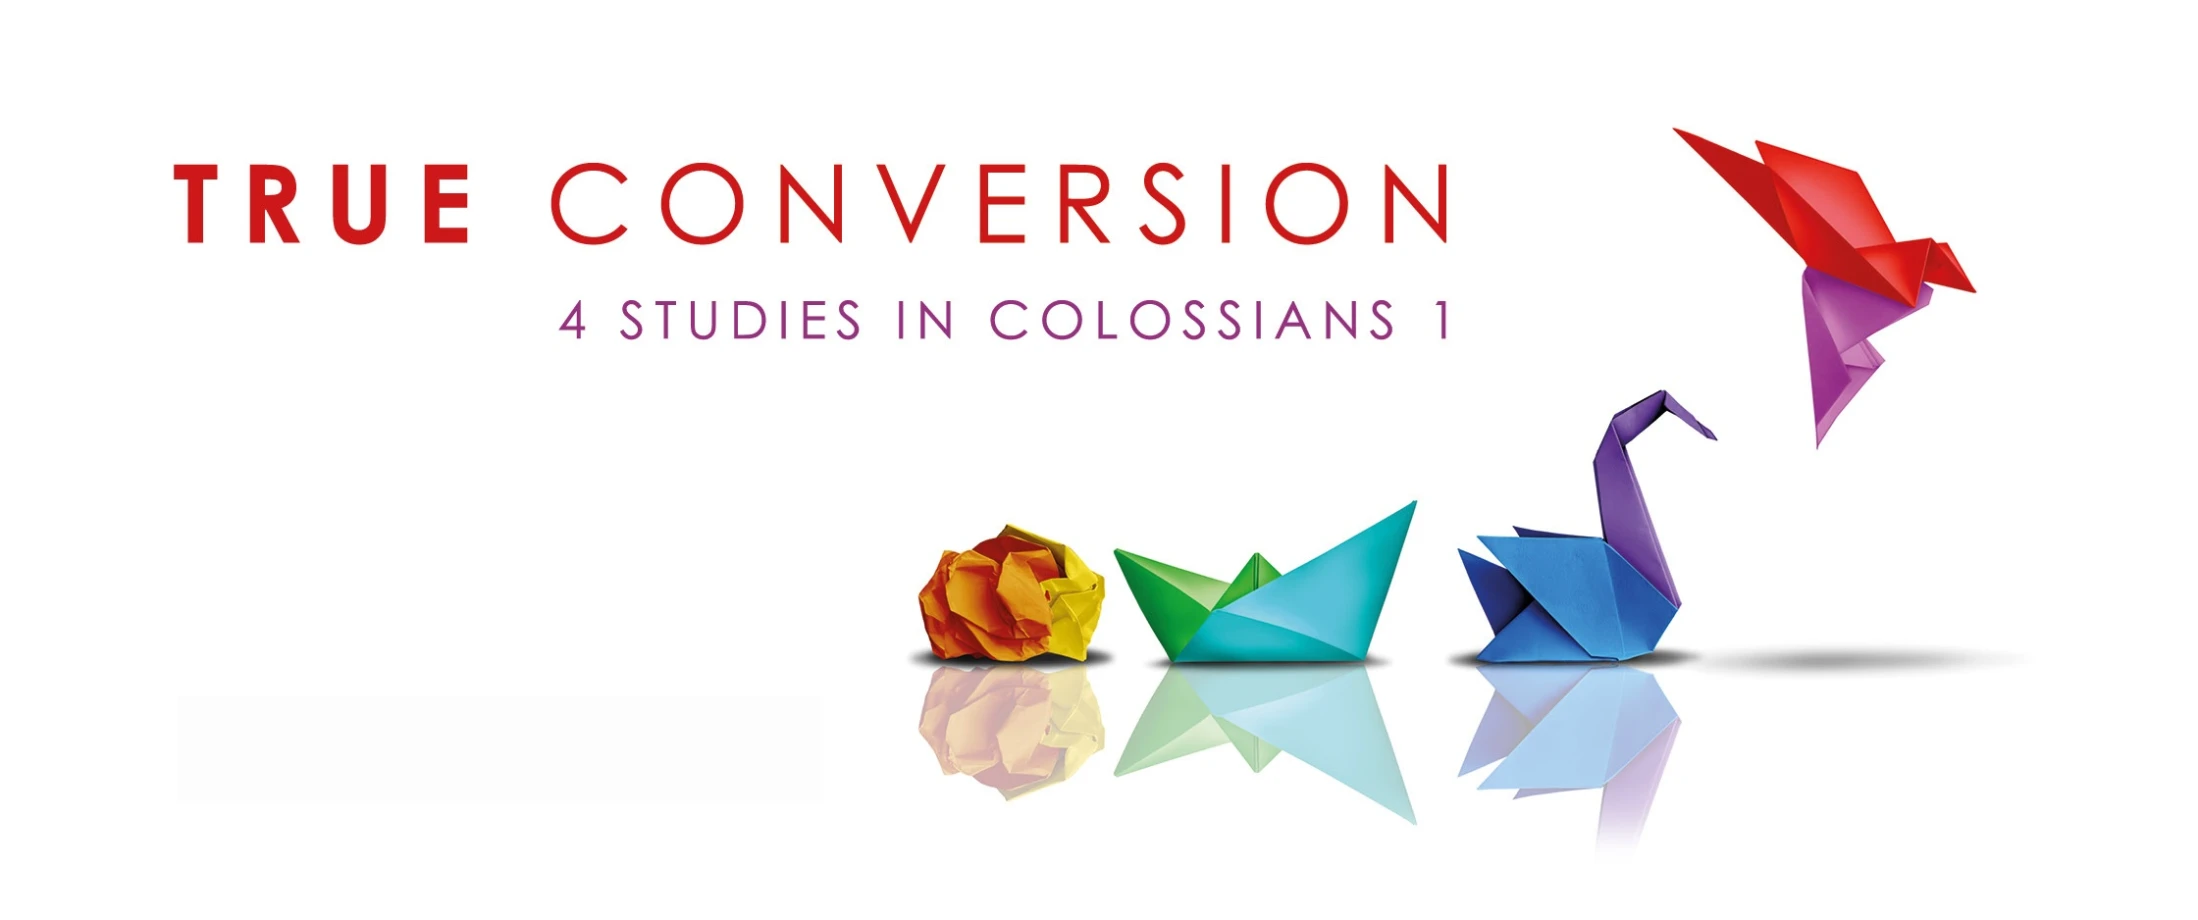 ‘Conversion to a community’